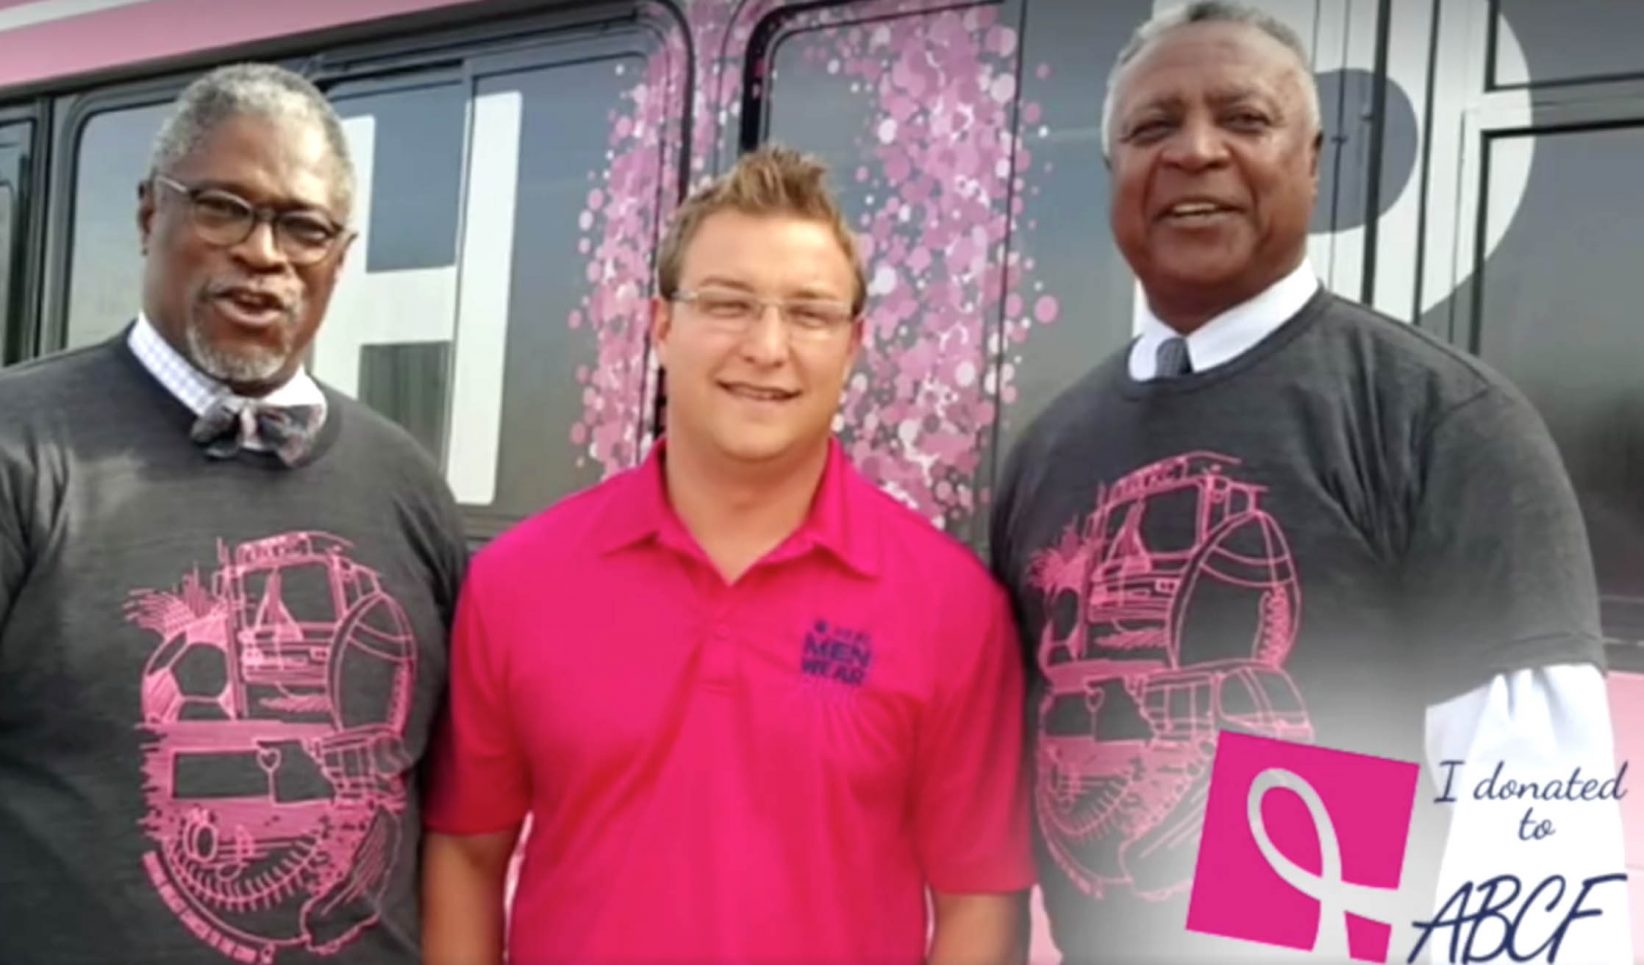 Successful VideoFizz campaign supports breast cancer awareness, research